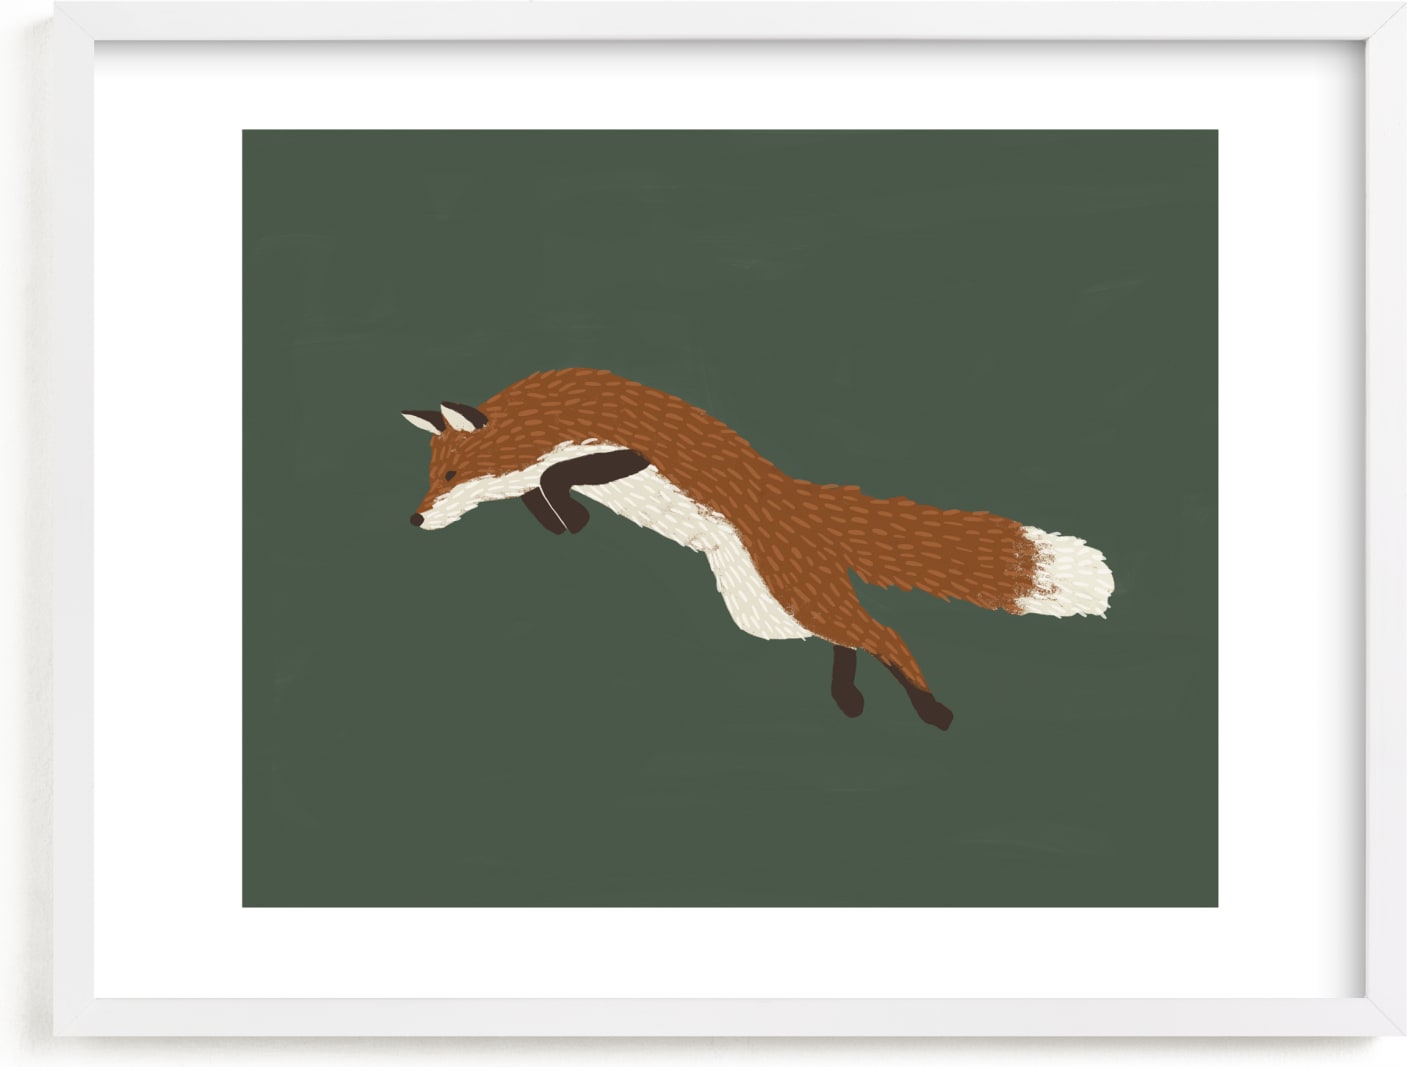 This is a green art by Kelly Ambrose called Leaping Fox.